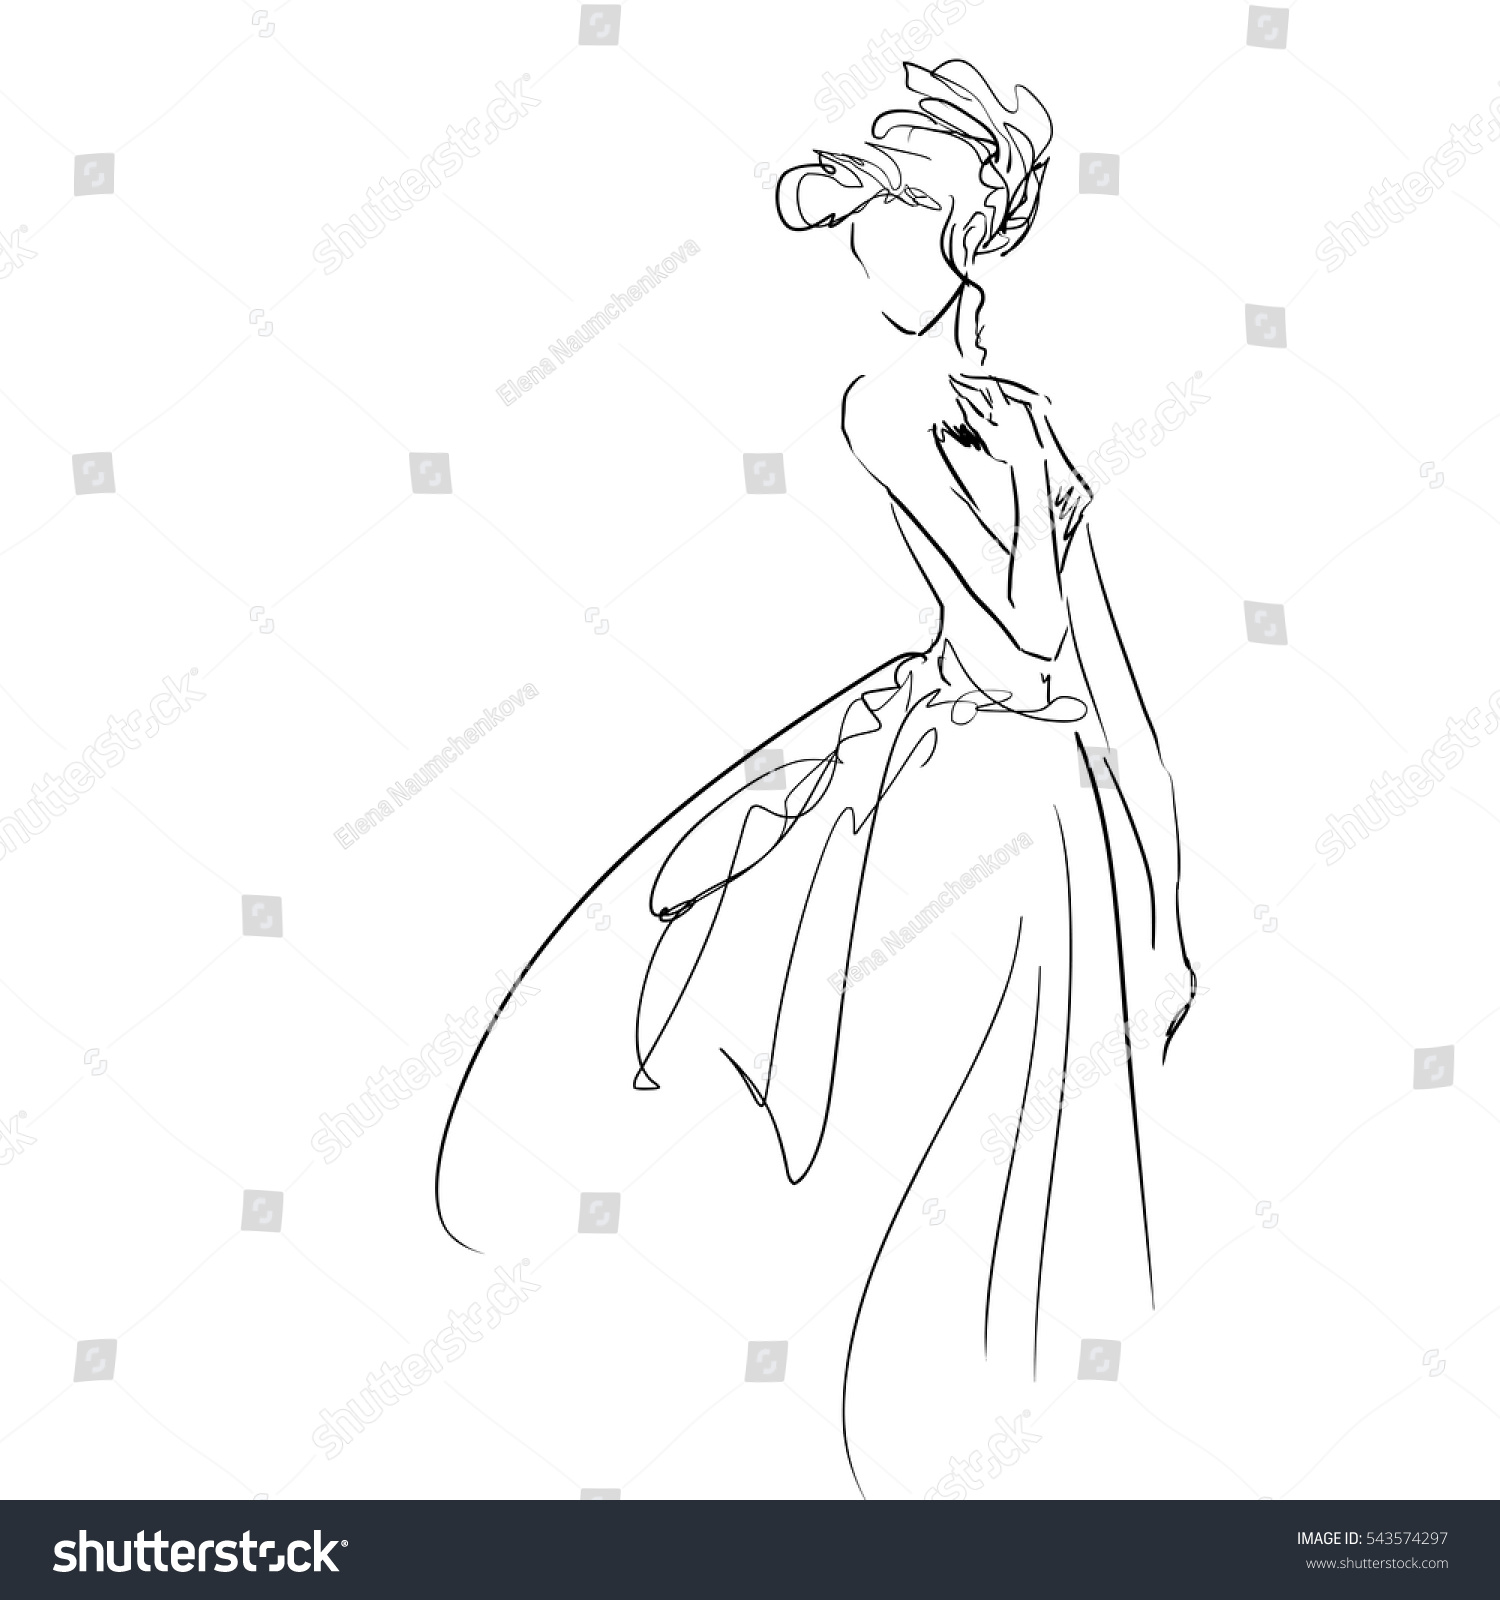 Vector Freehand Art Elegant Young Woman Stock Vector 543574297 ...